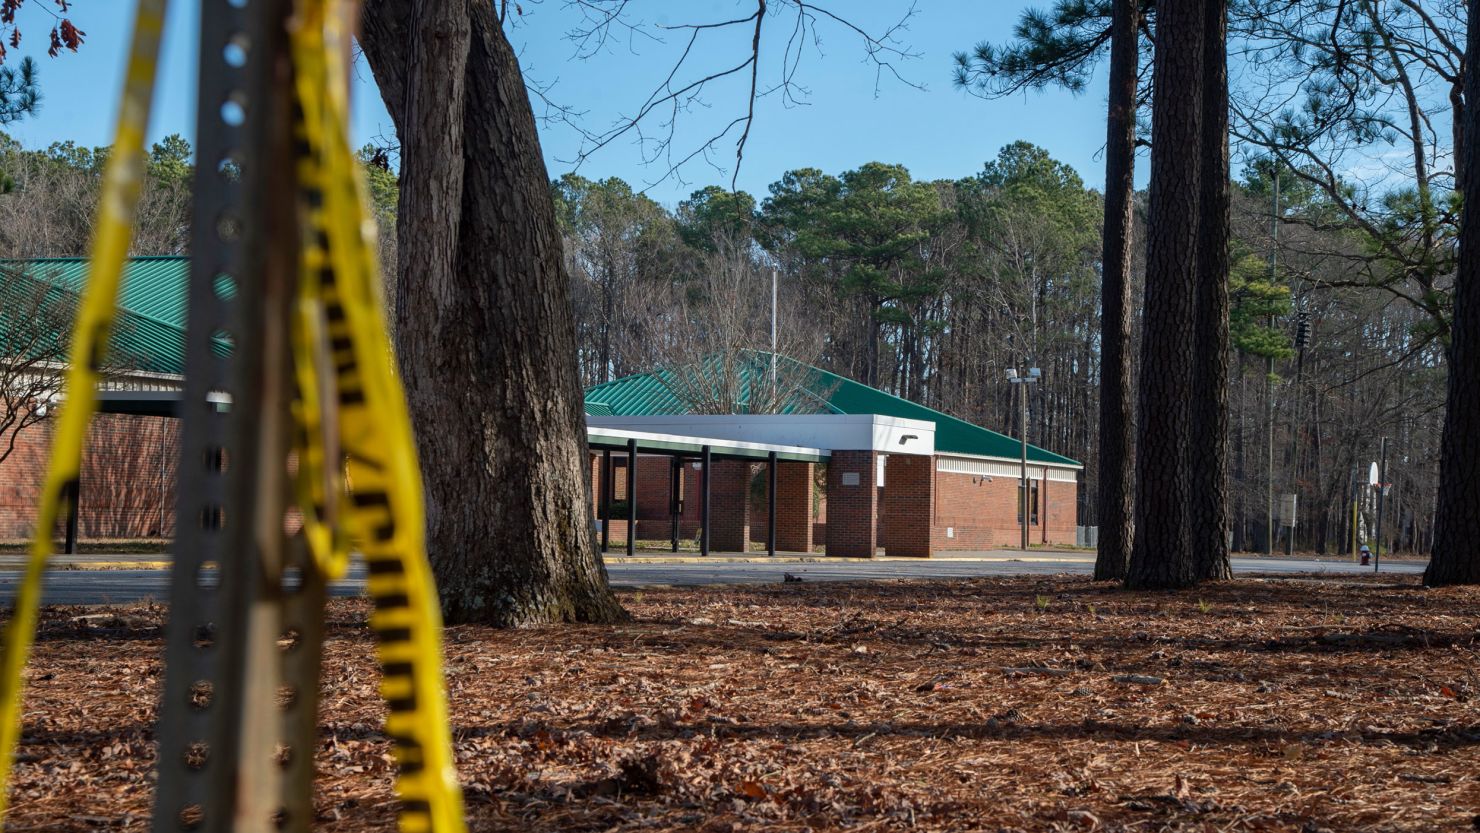 Police tape hangs from a sign post outside Richneck Elementary School following the shooting on January 7, 2023, in Newport News, Virginia.